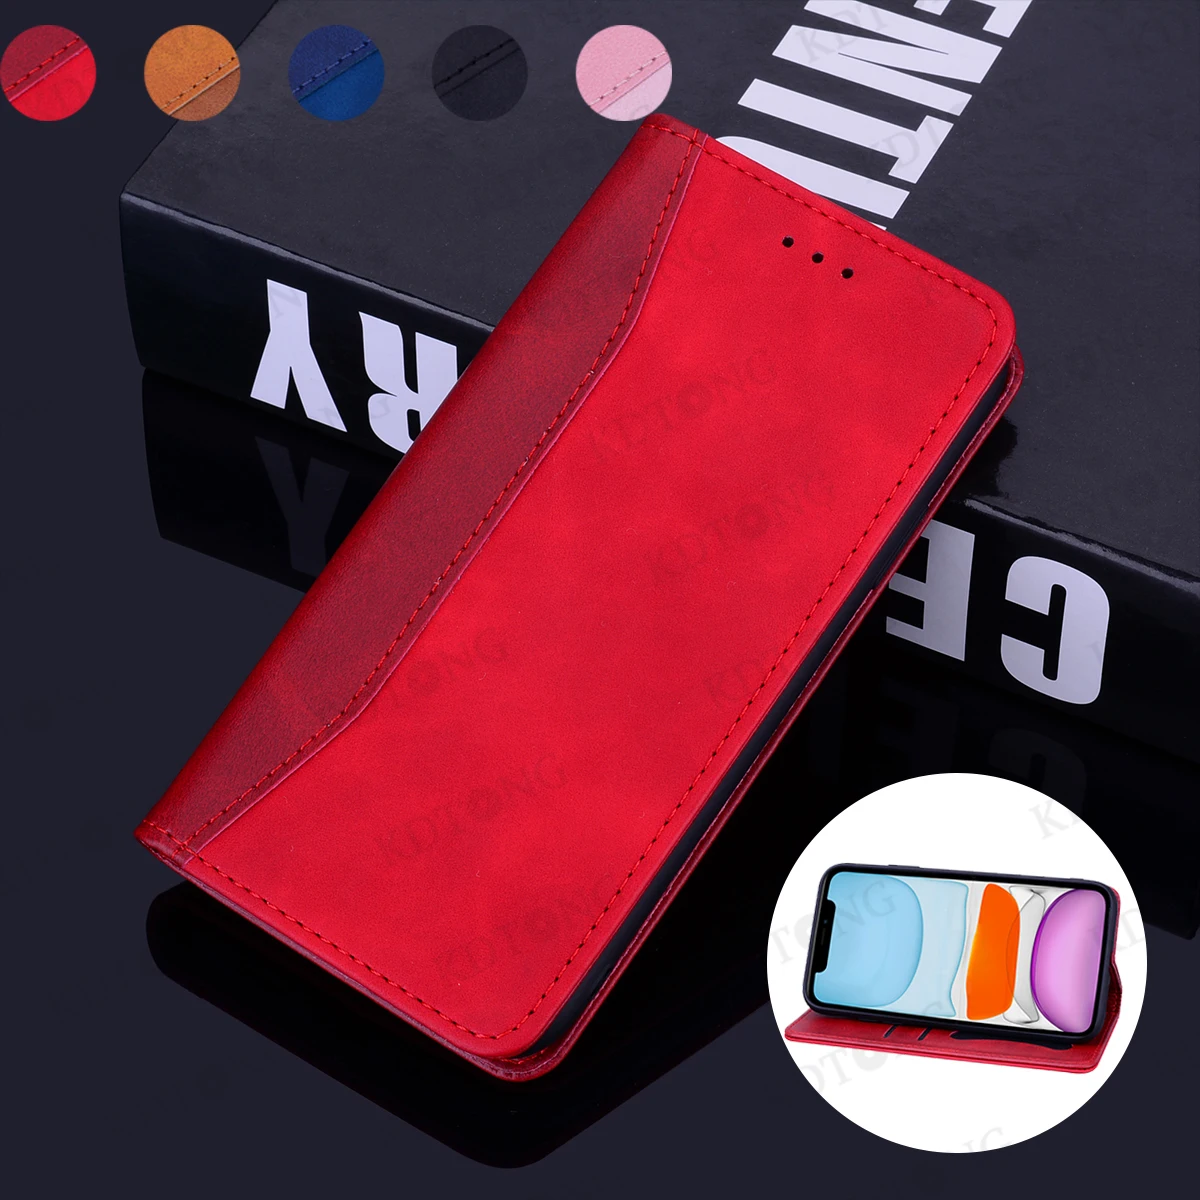 

Ultra thin Flip Leather Case For Samsung Galaxy A72 A52 A42 A12 A11 A41 A31 A21 A71 A51 A20 A10 A80 A90 A70 A50 A30 A40 S E Case